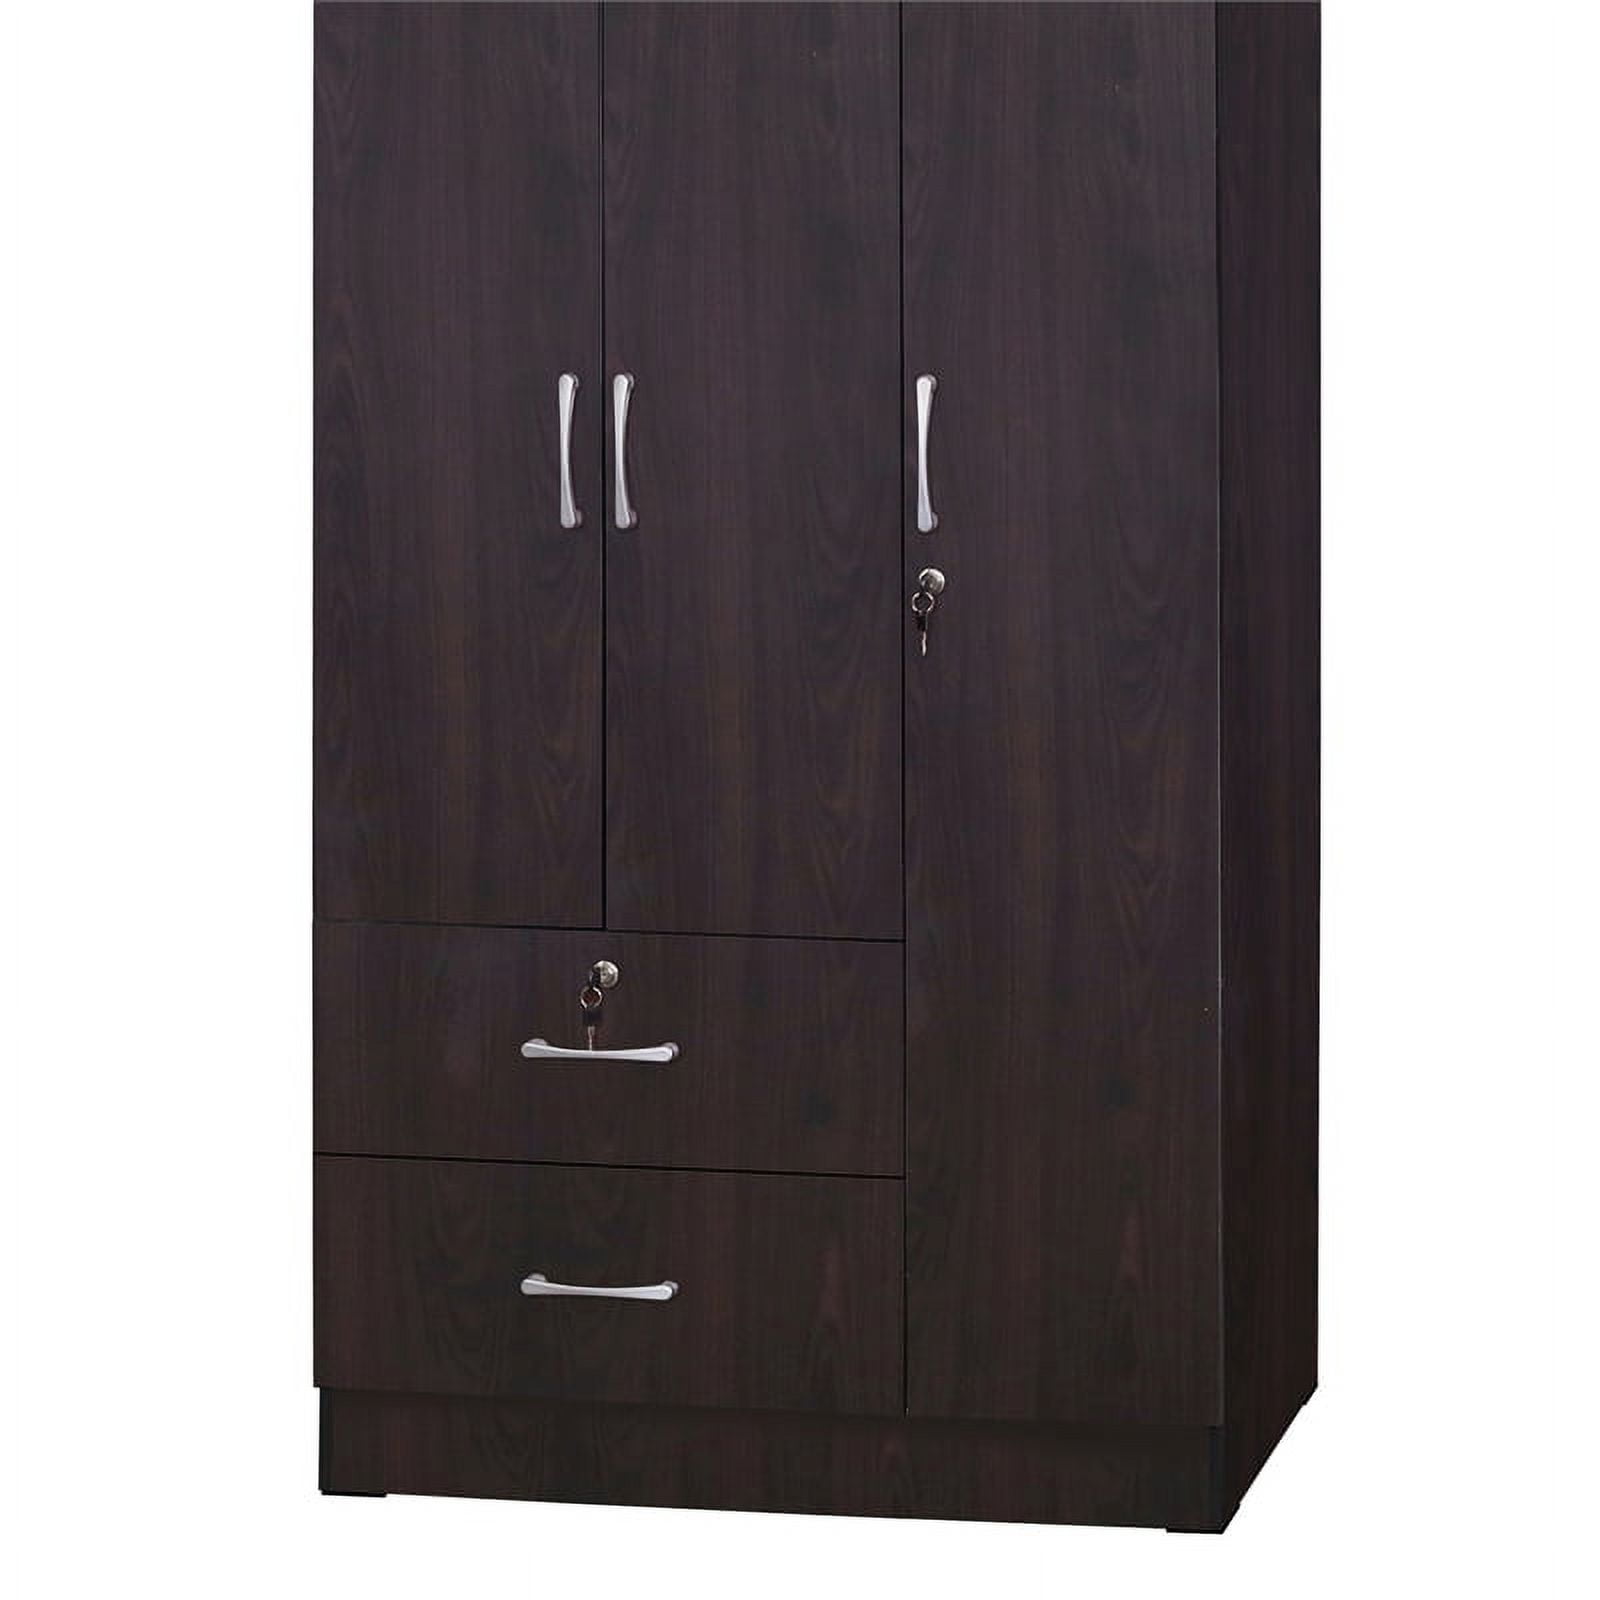 Pemberly Row Modern Wardrobe Armoire Closet with Two Drawers Tobacco